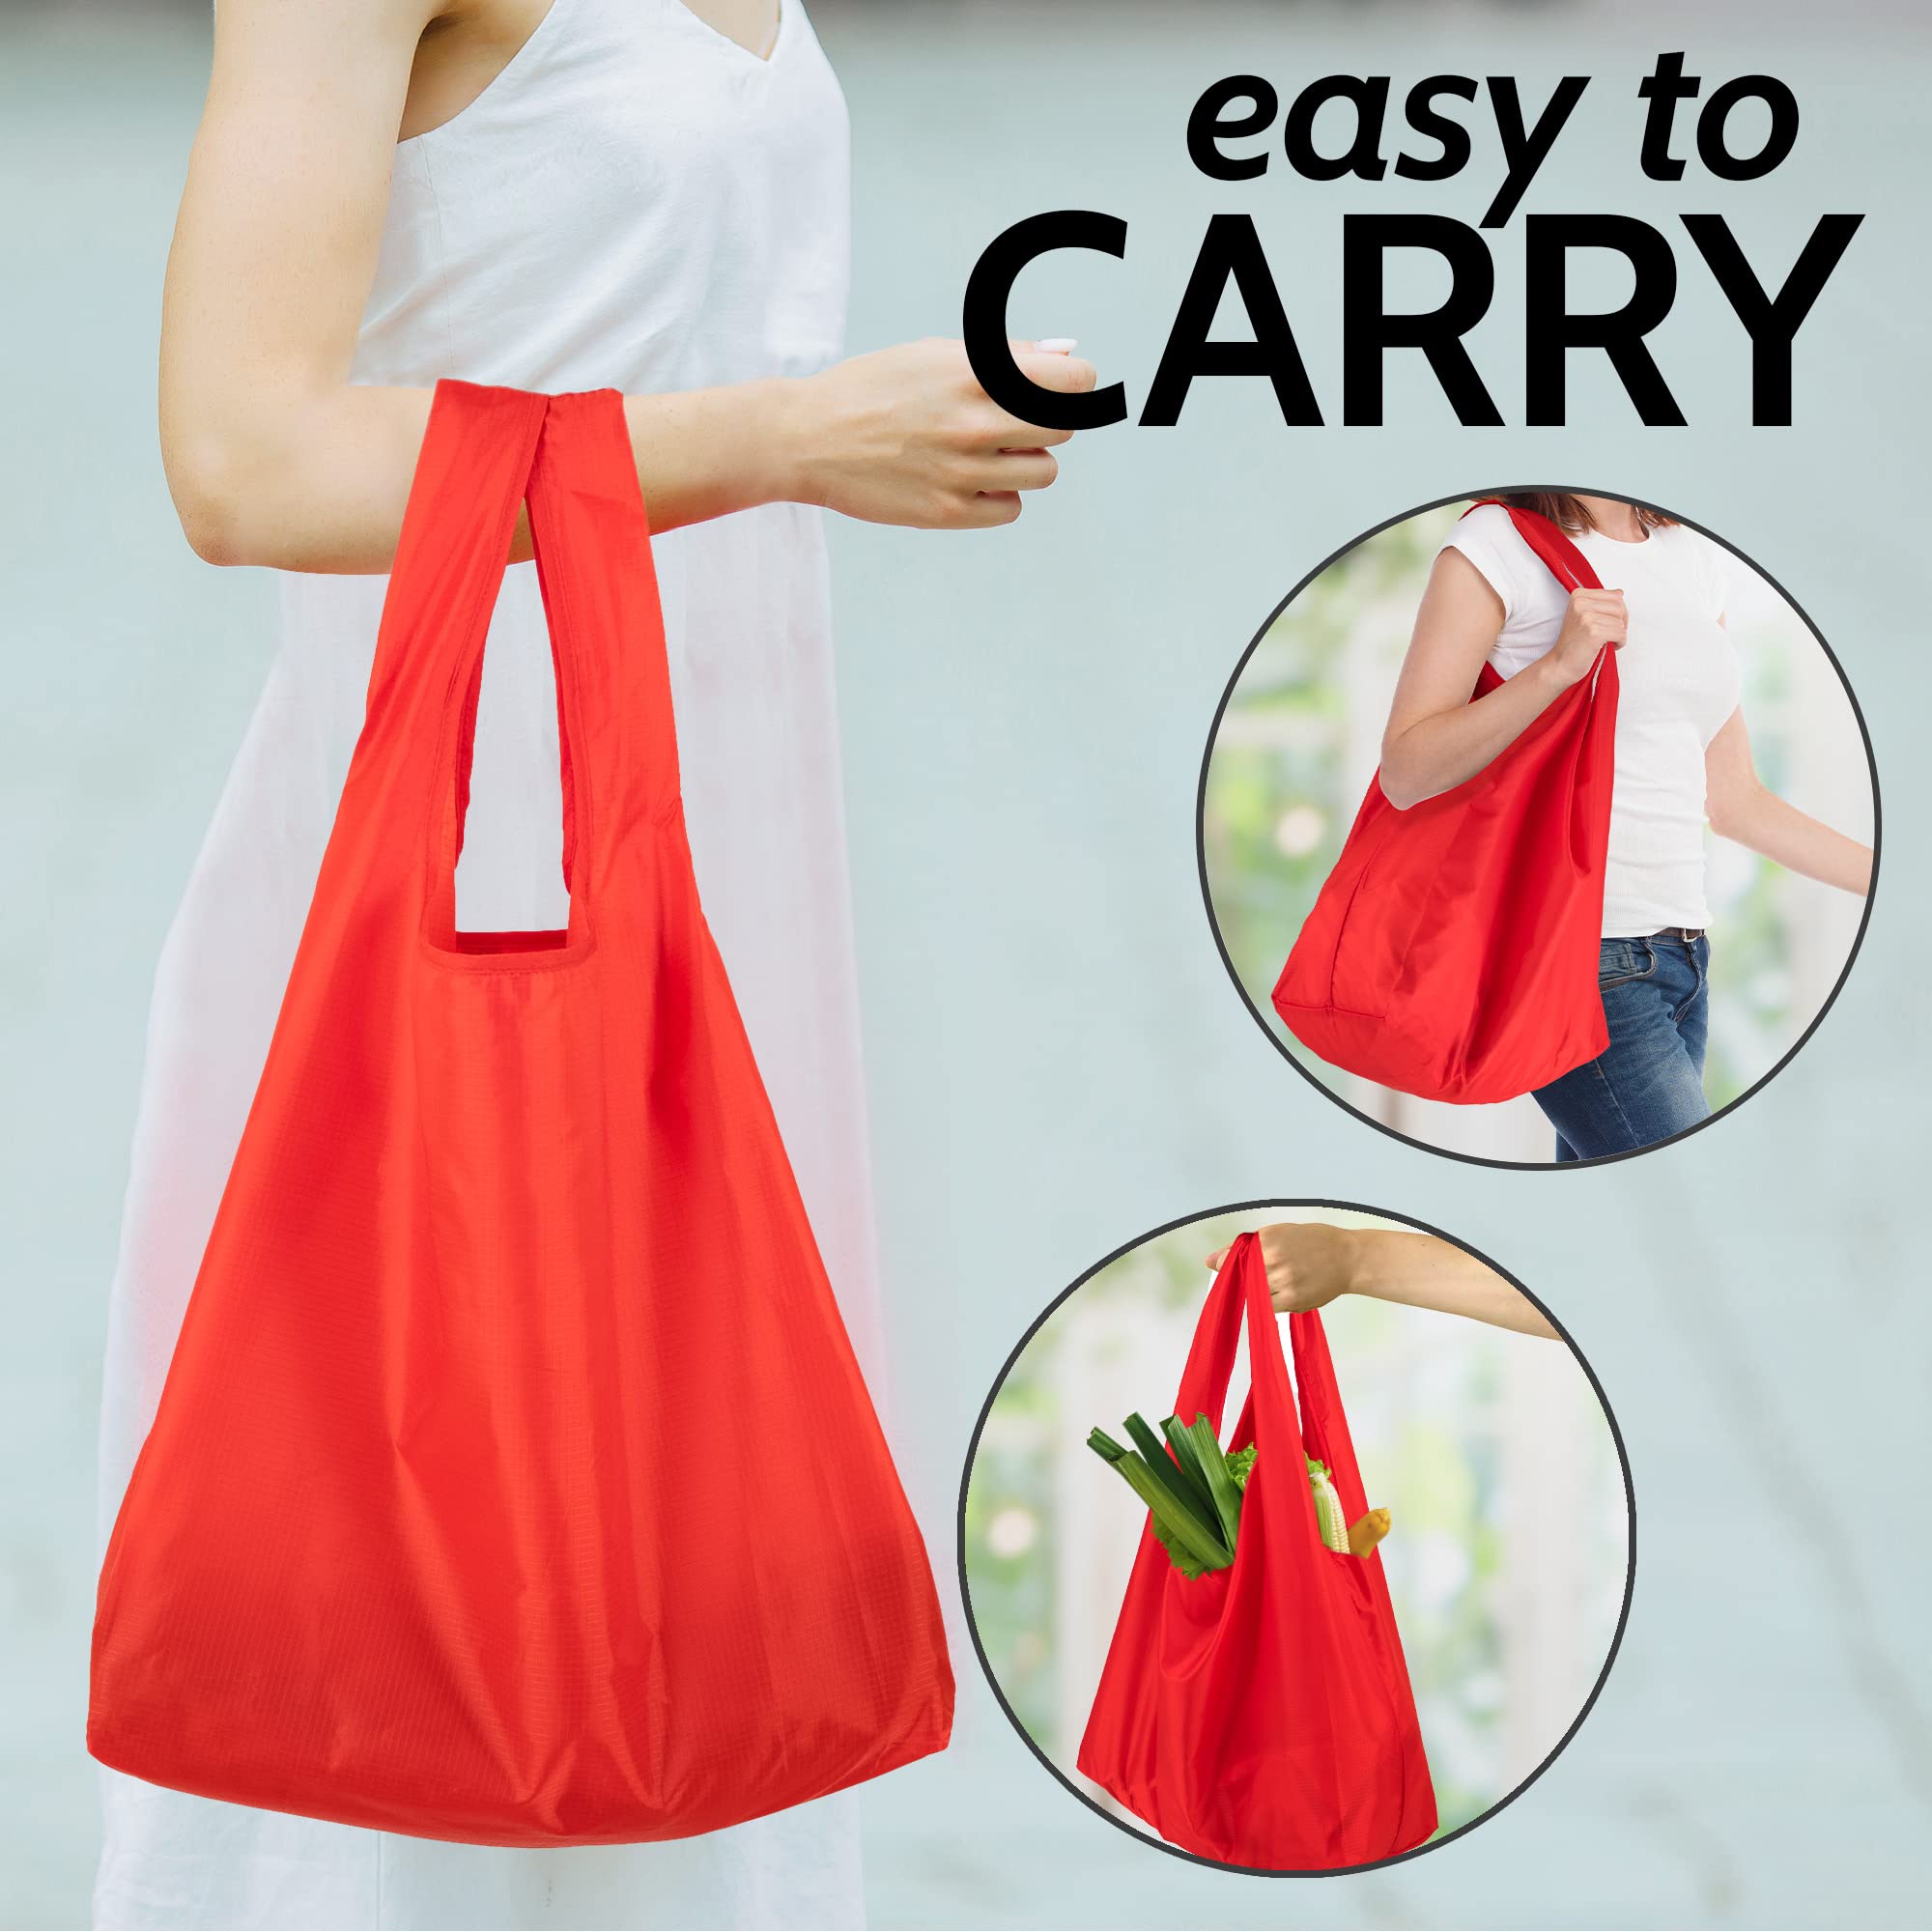 Reusable Grocery Bags - 5 Pack from Zulay Kitchen